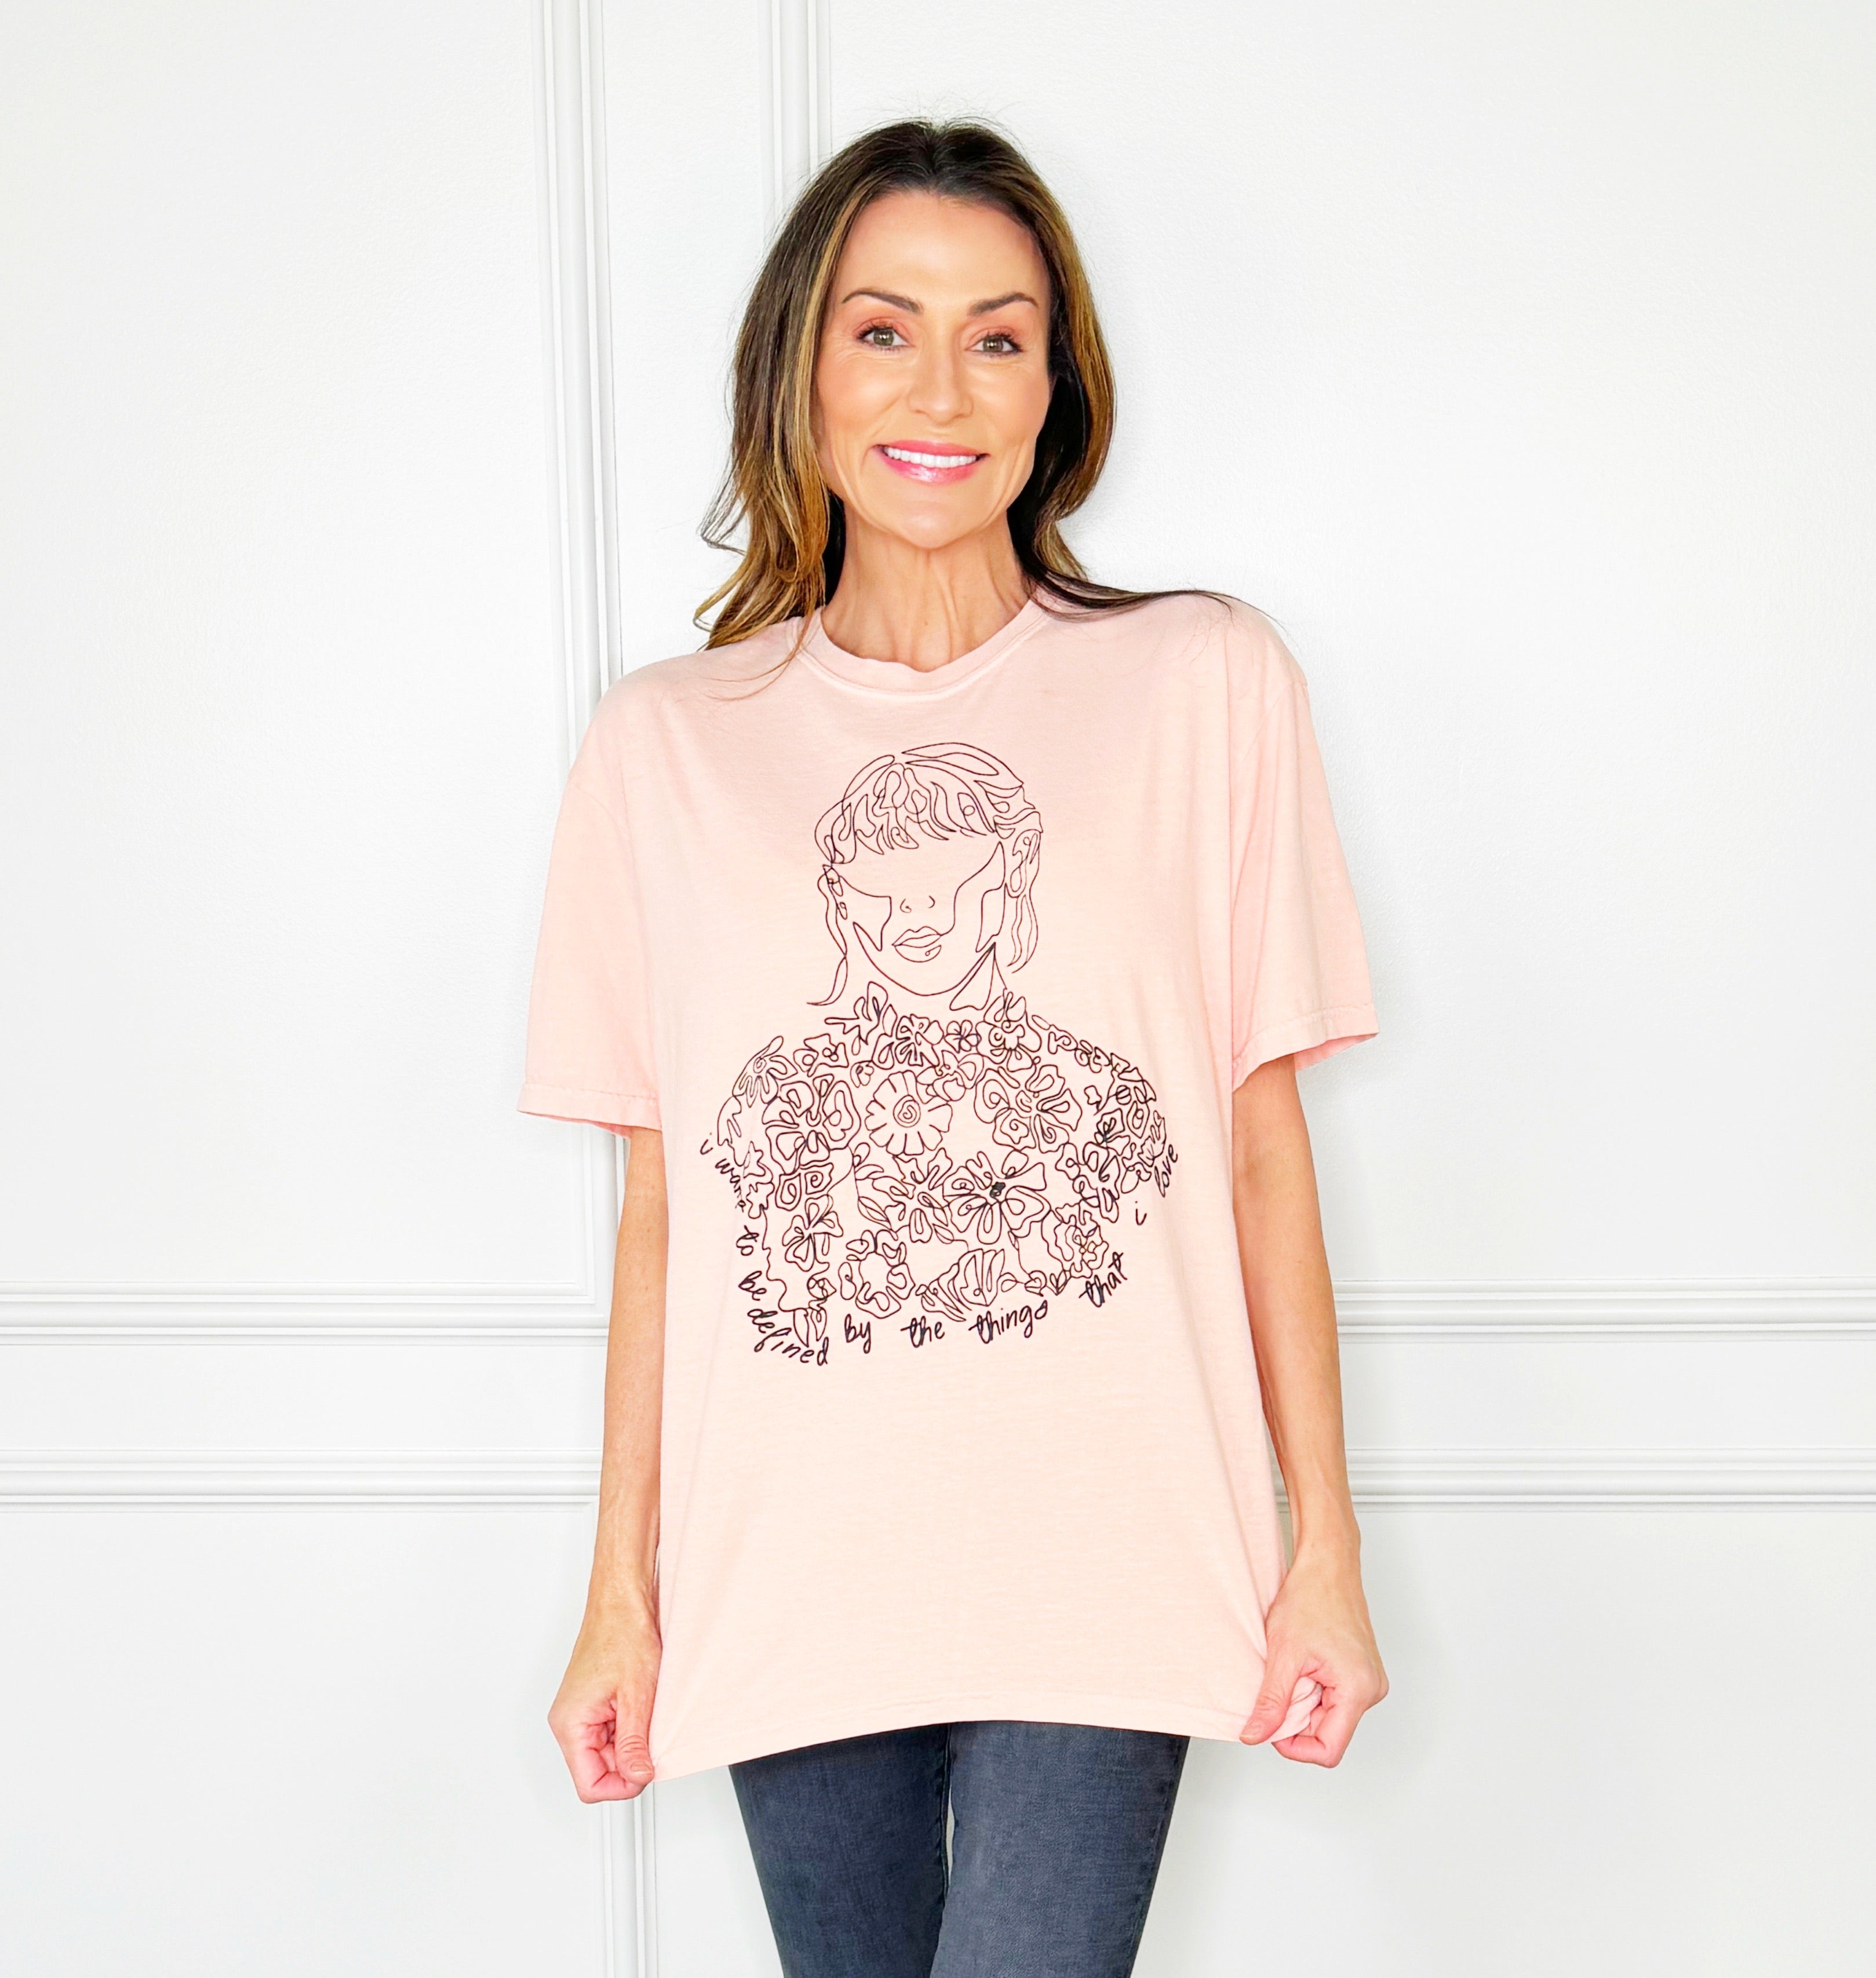 Taylor Flower Outline Tee Youth & Adult